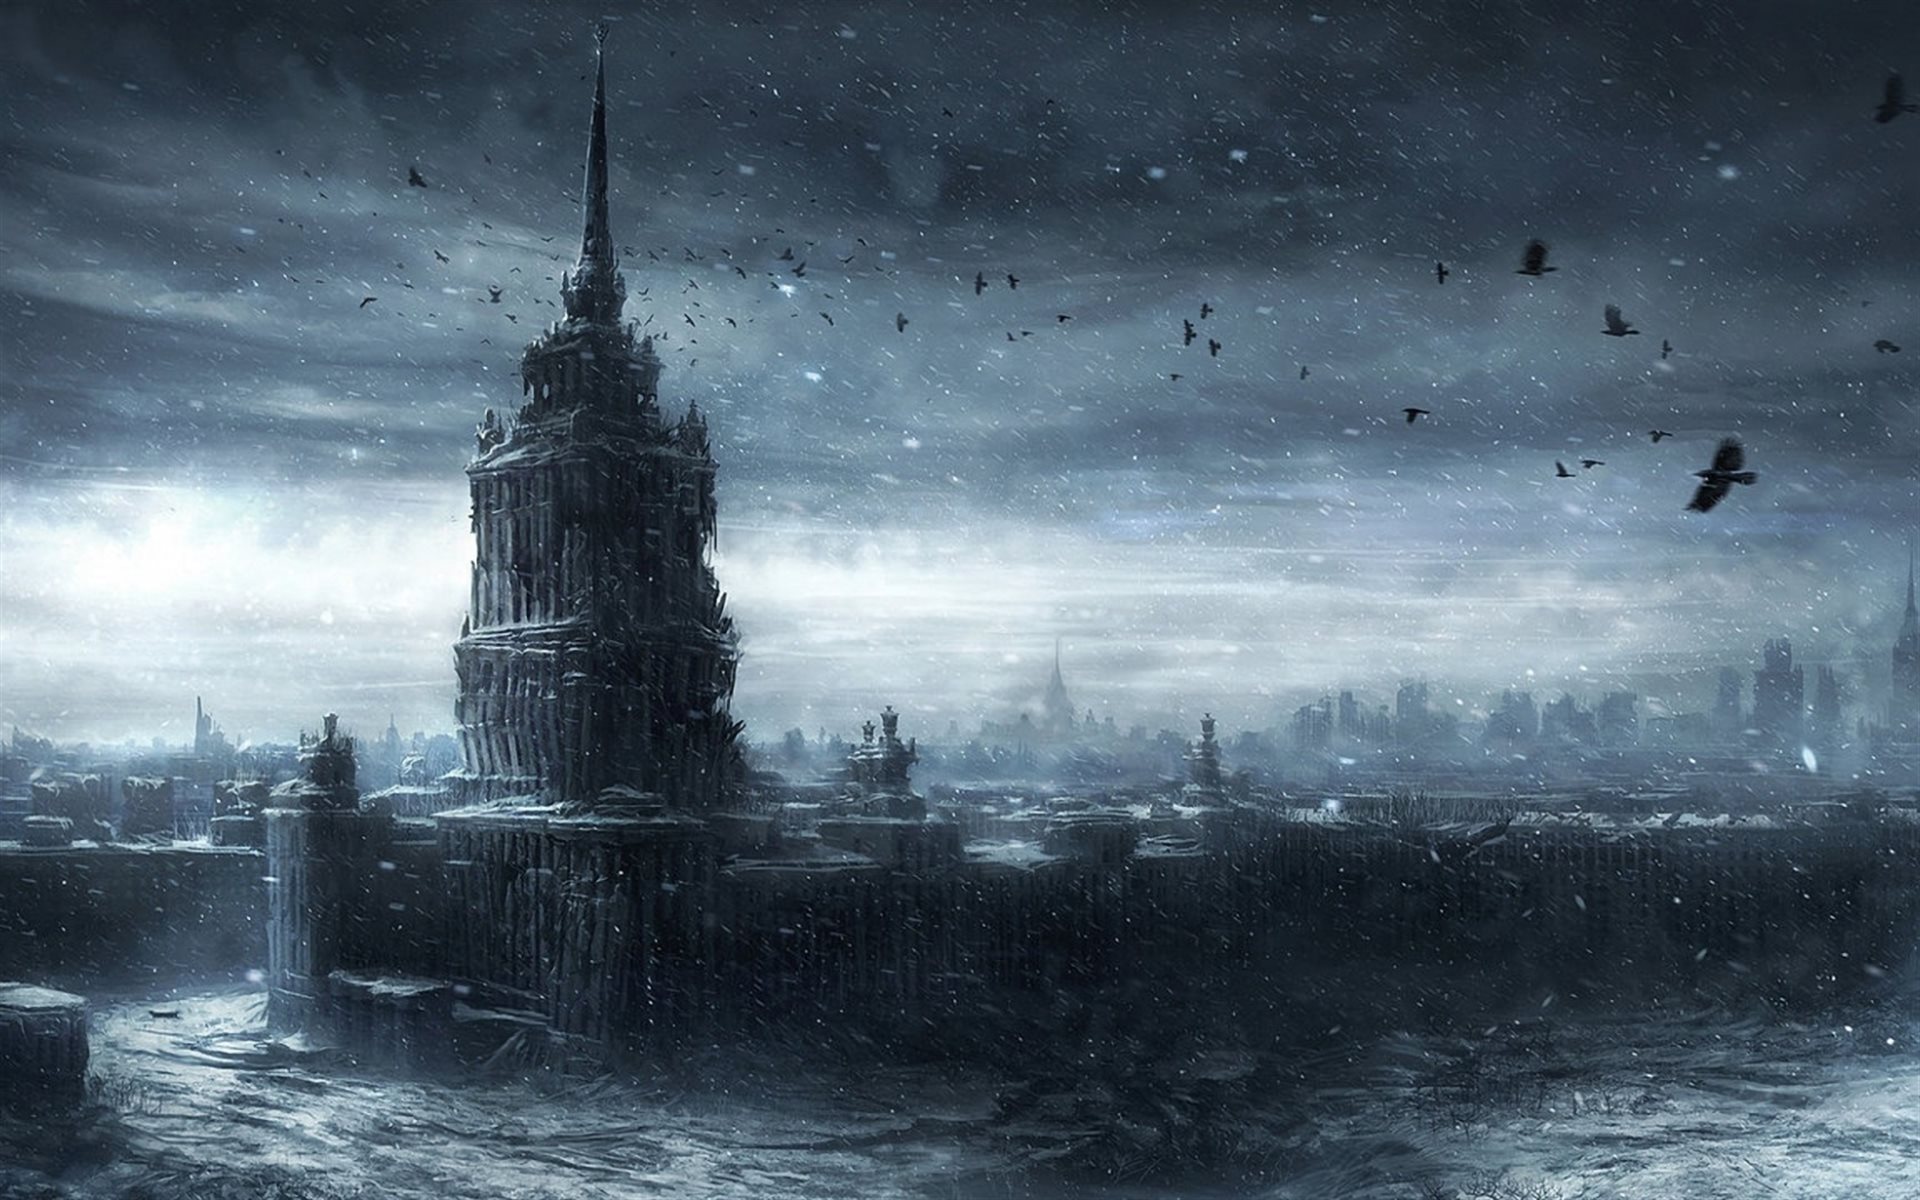 Download wallpaper Moscow, apocalypse, snow, crow, winter, ruins, abandoned buildings for desktop with resolution 1920x1200. High Quality HD picture wallpaper